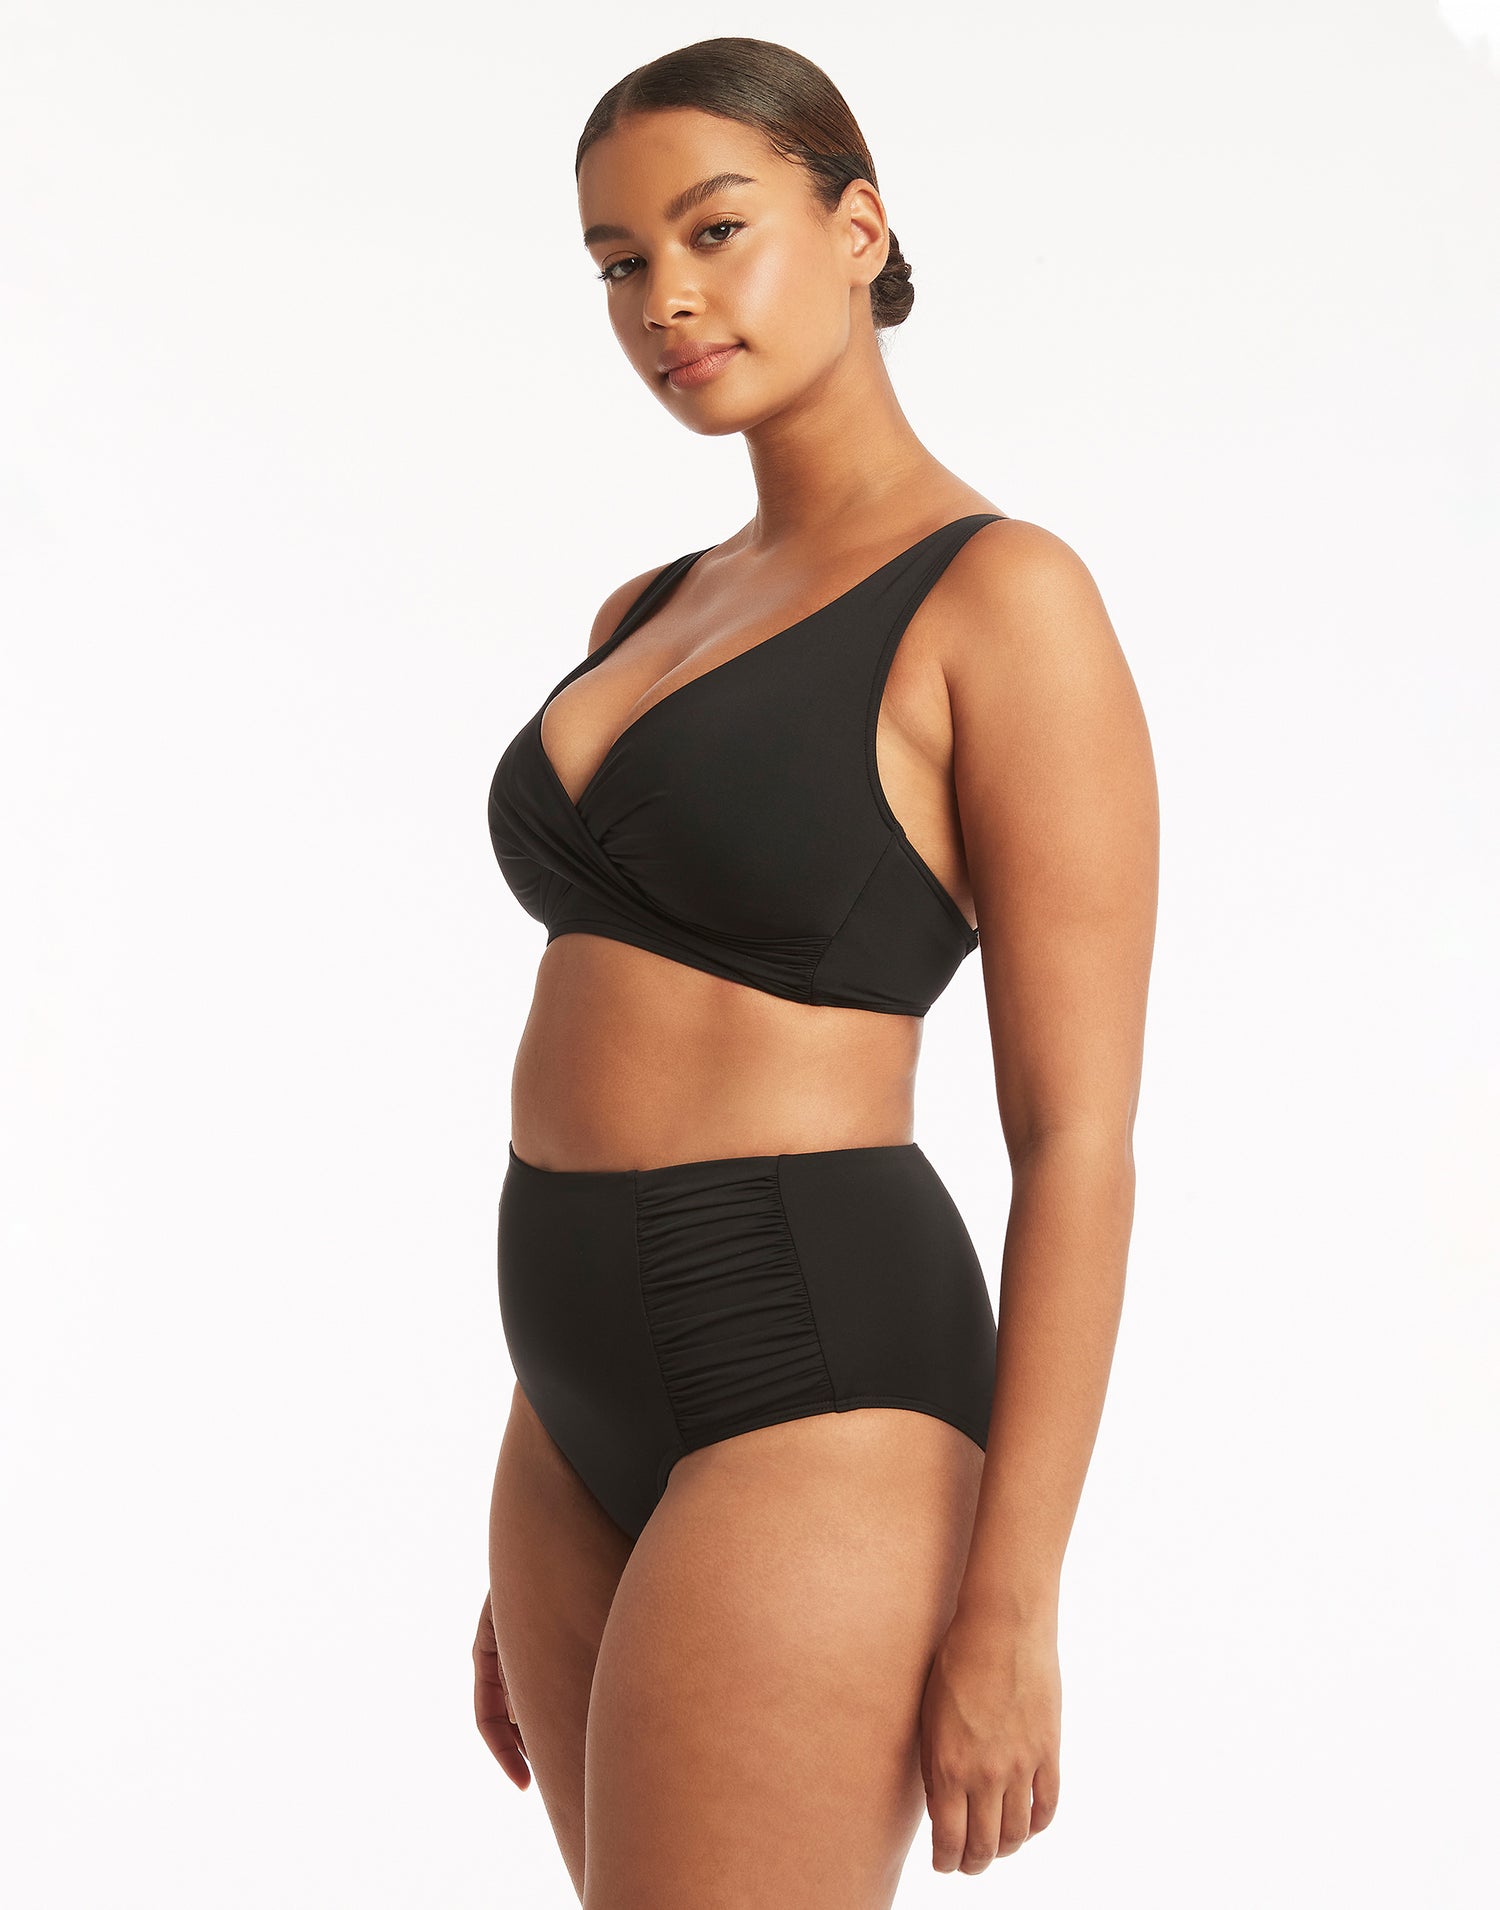 Essentials Gathered Side High Waist Bottom by Sea Level in Black - Angled View